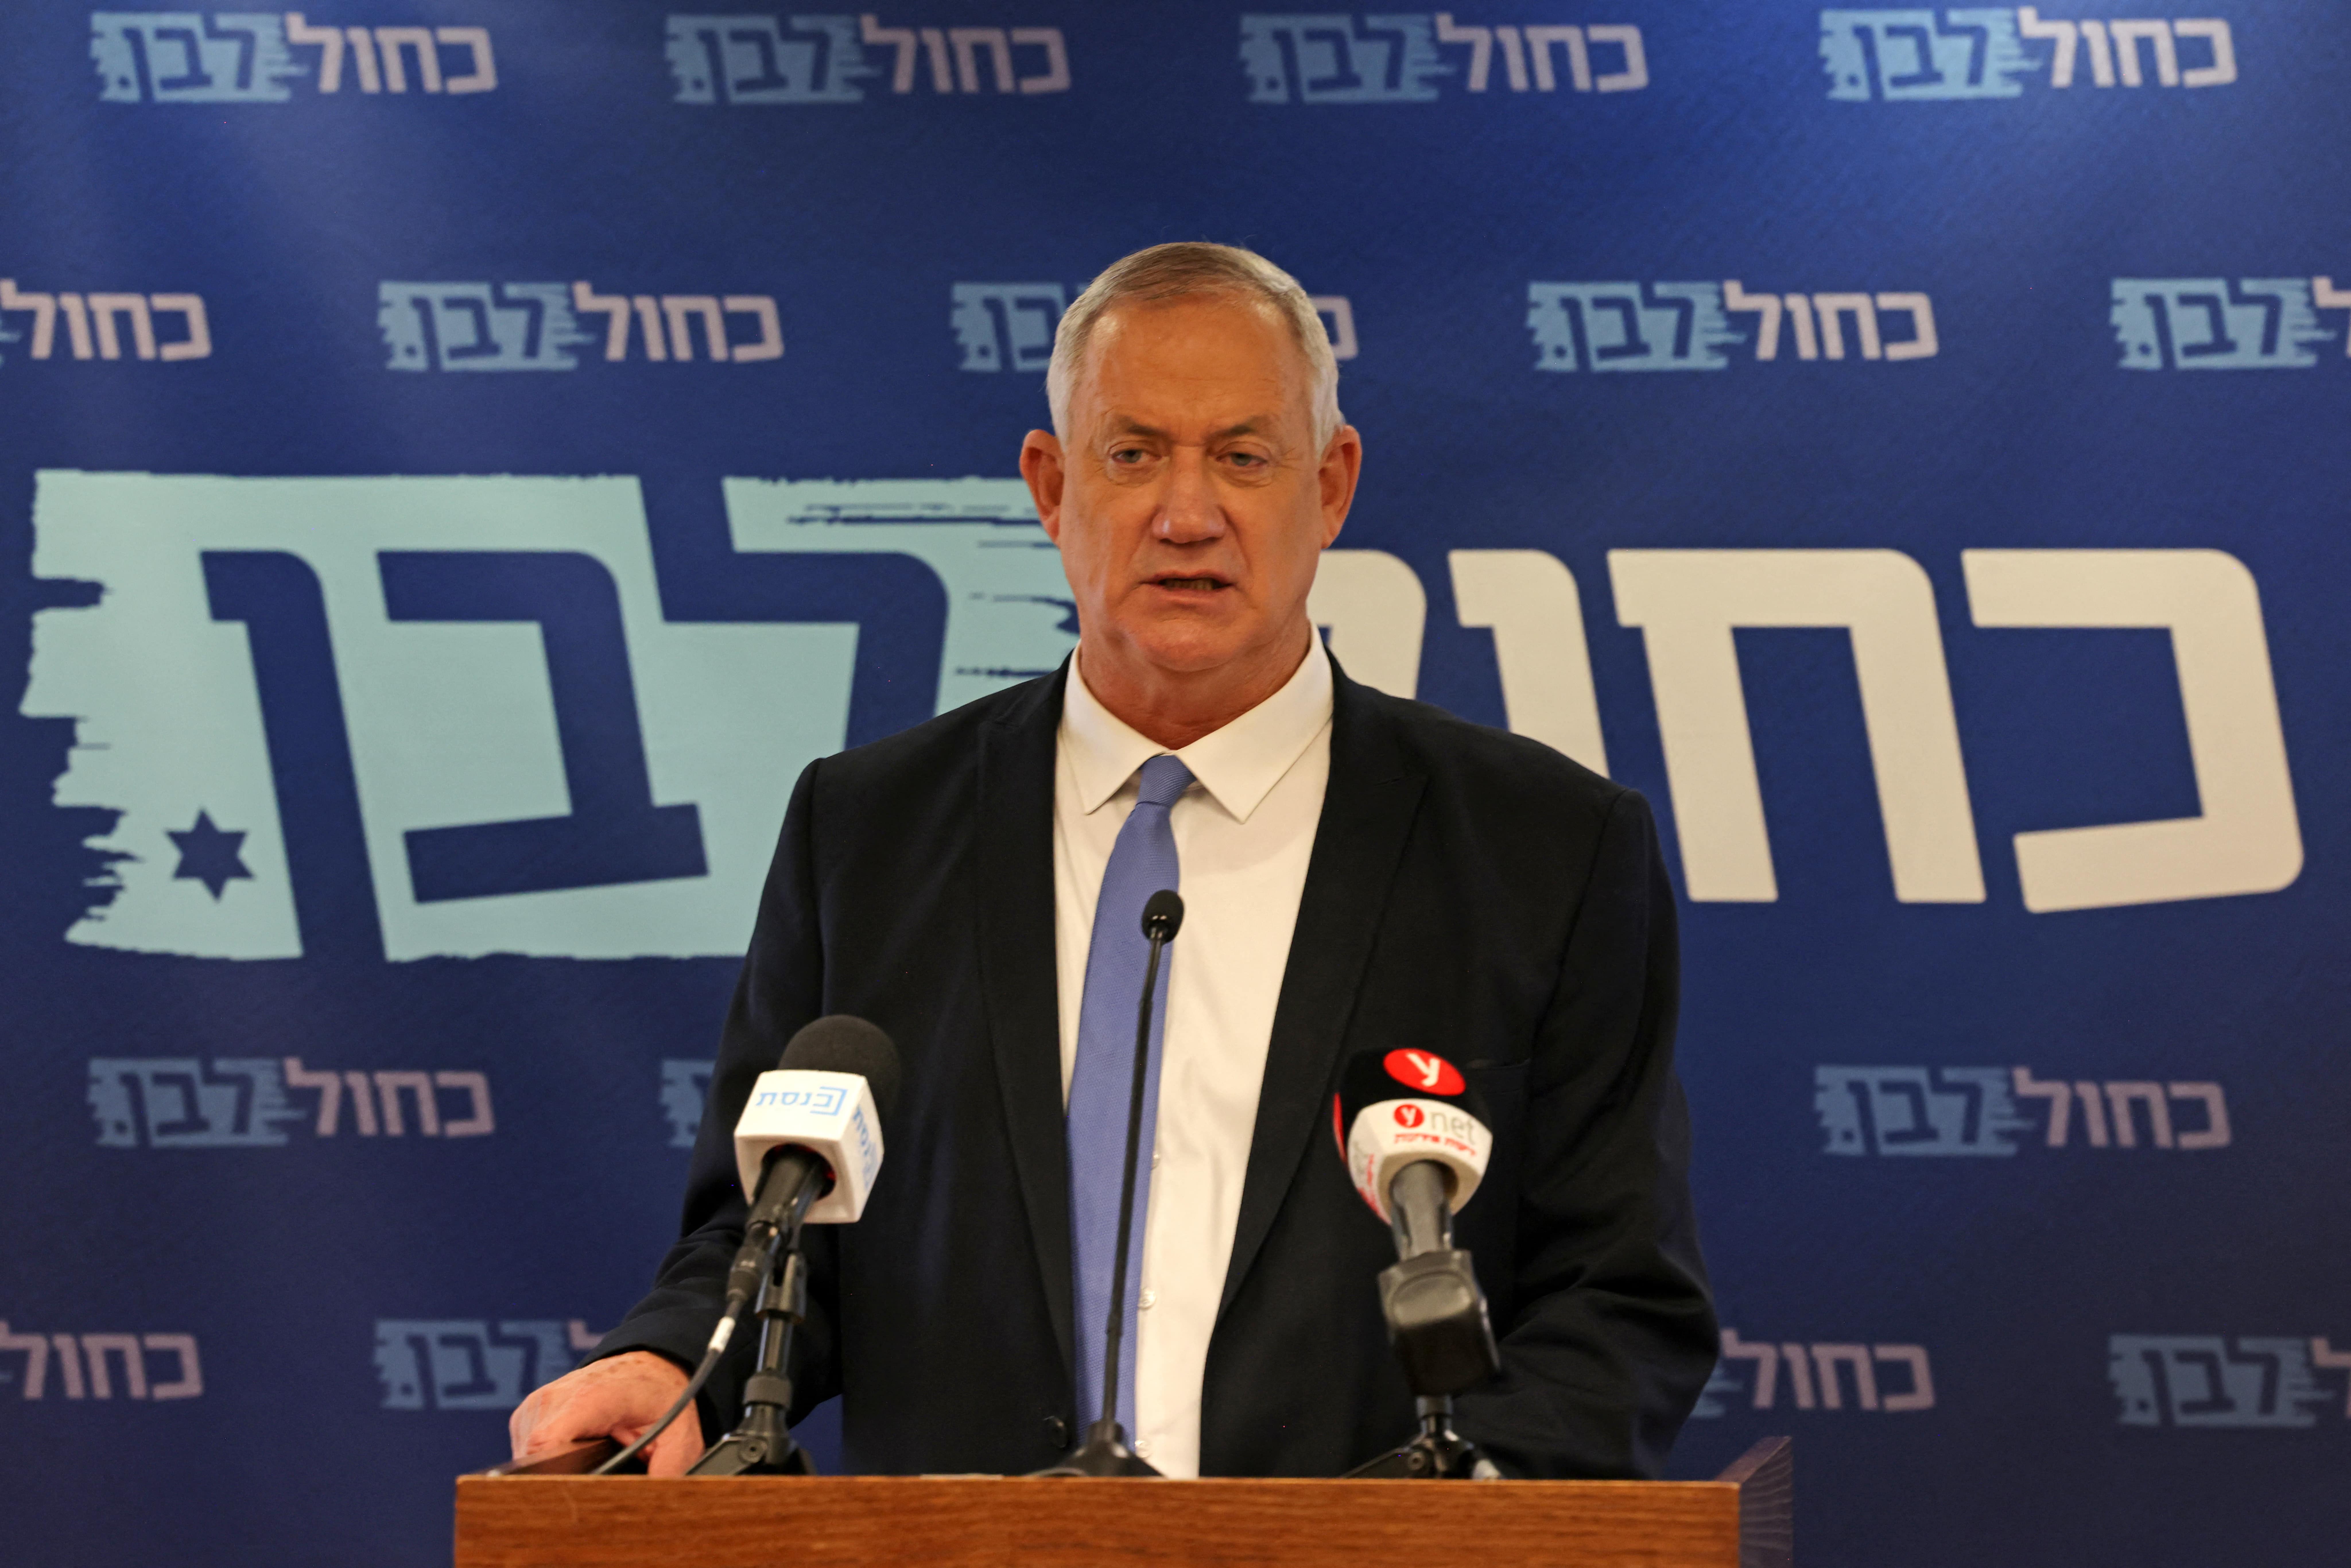 Israeli Defence Minister and leader of Blue and White party Benny Gantz addresses a press conference at his party's office in the Knesset in Jerusalem on 7 June, 2021. (AFP)